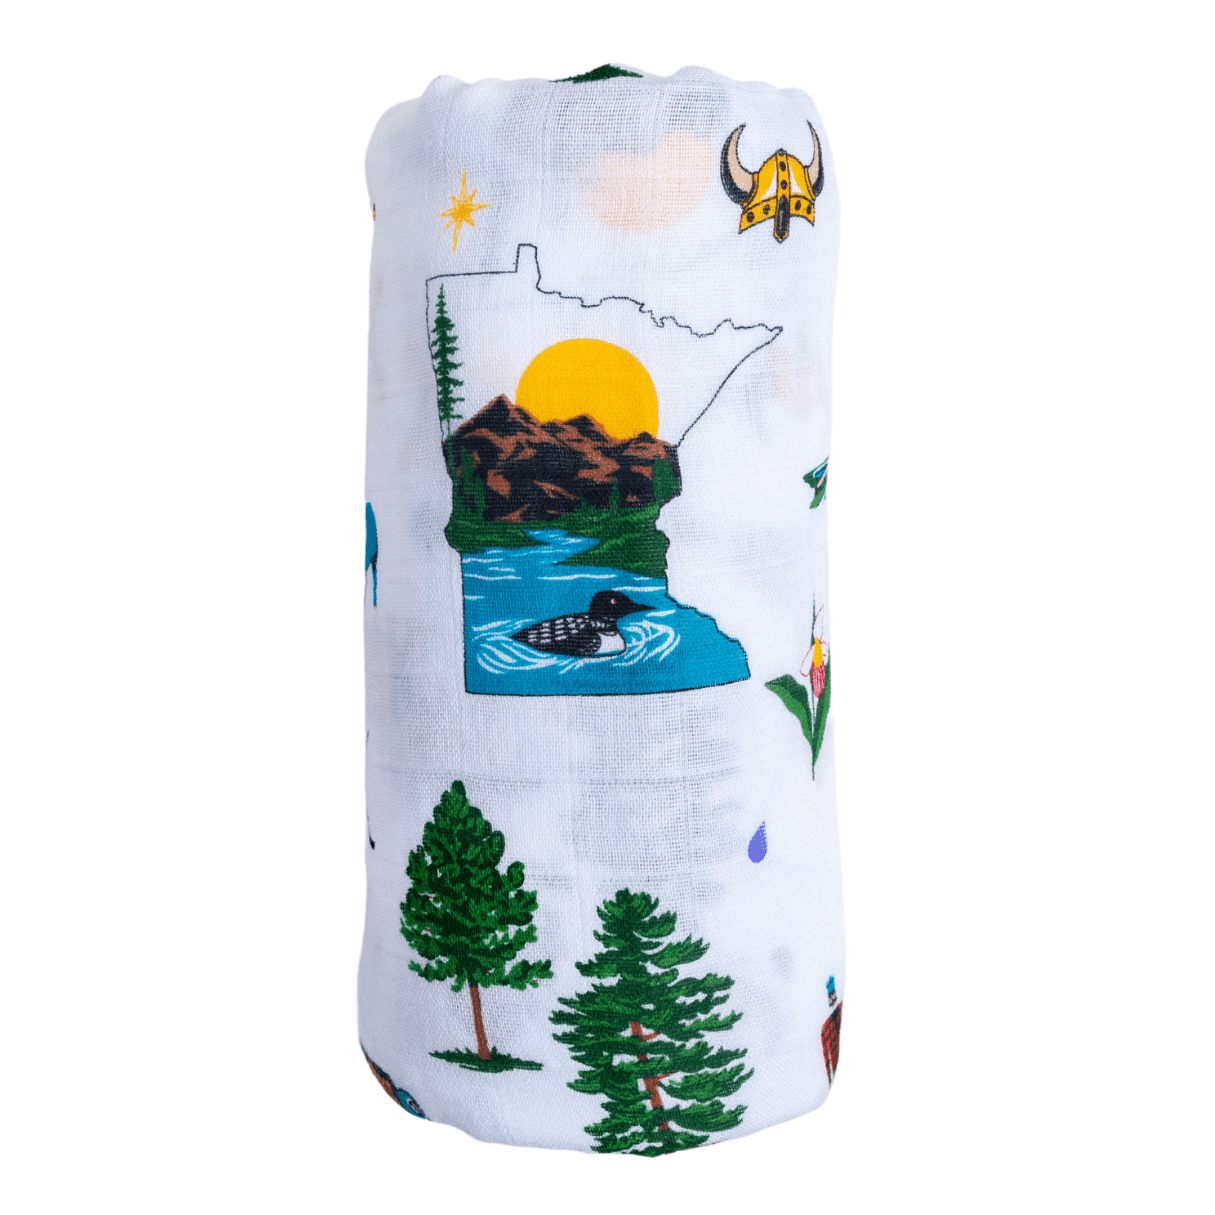 Minnesota-themed baby muslin swaddle blanket featuring an outline of the map with a loon swimming during sunrise